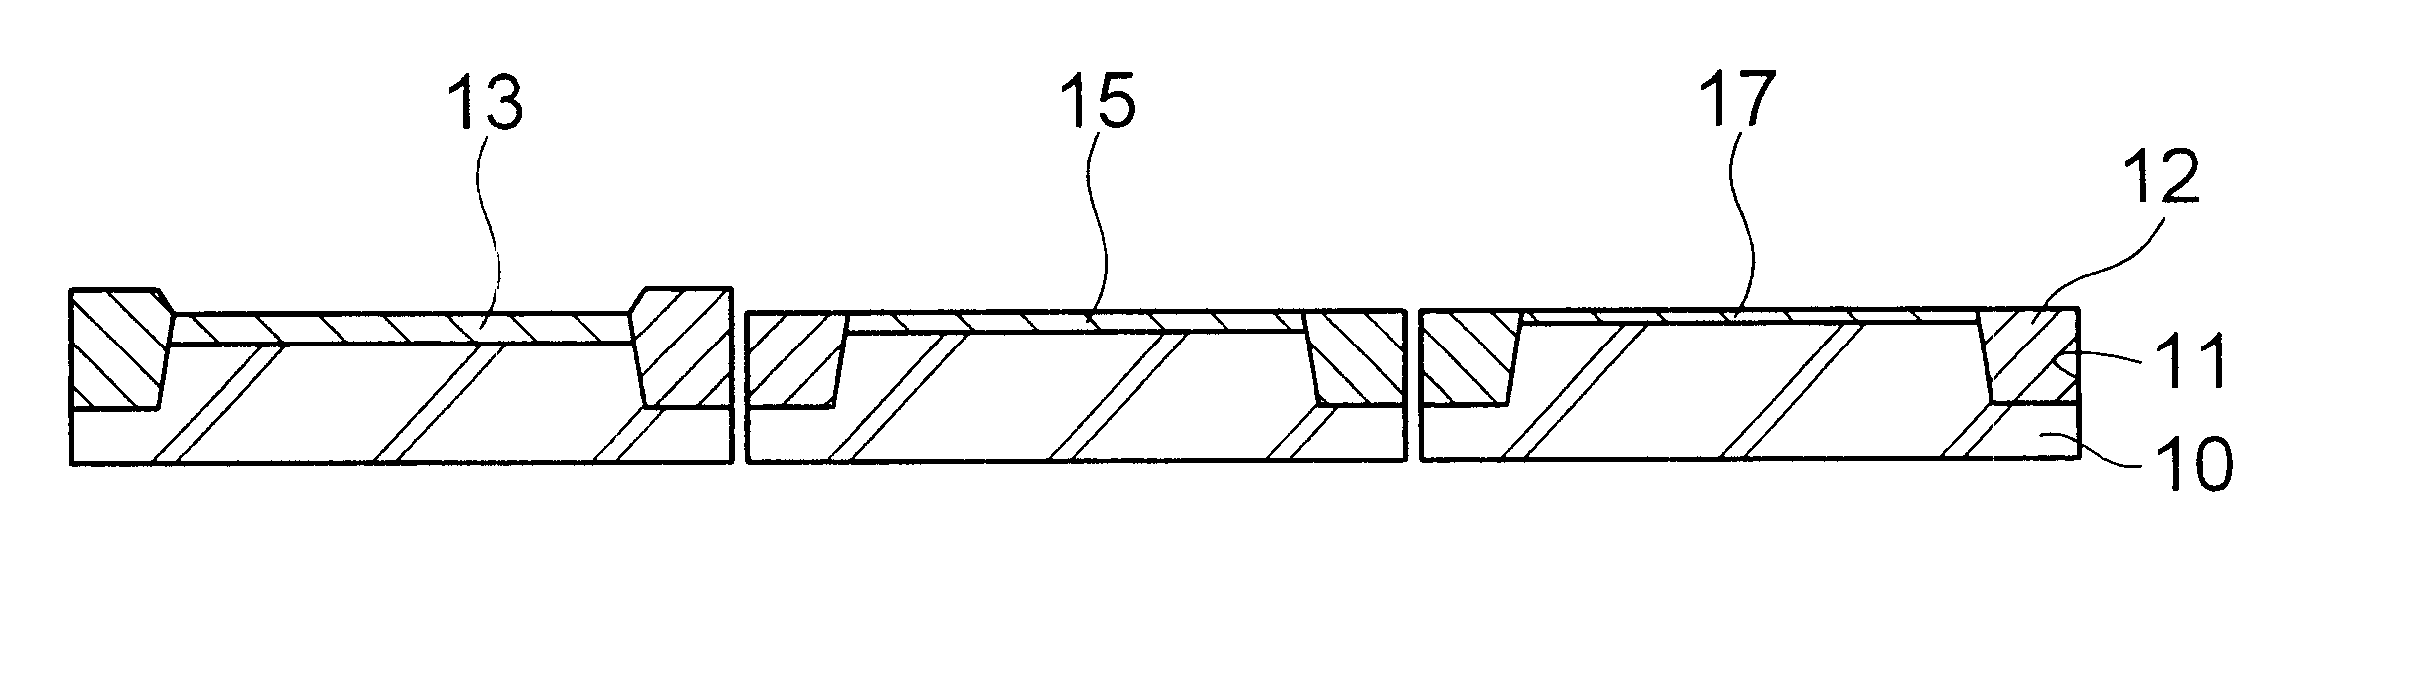 Semiconductor device including gate insulation films having different thicknesses